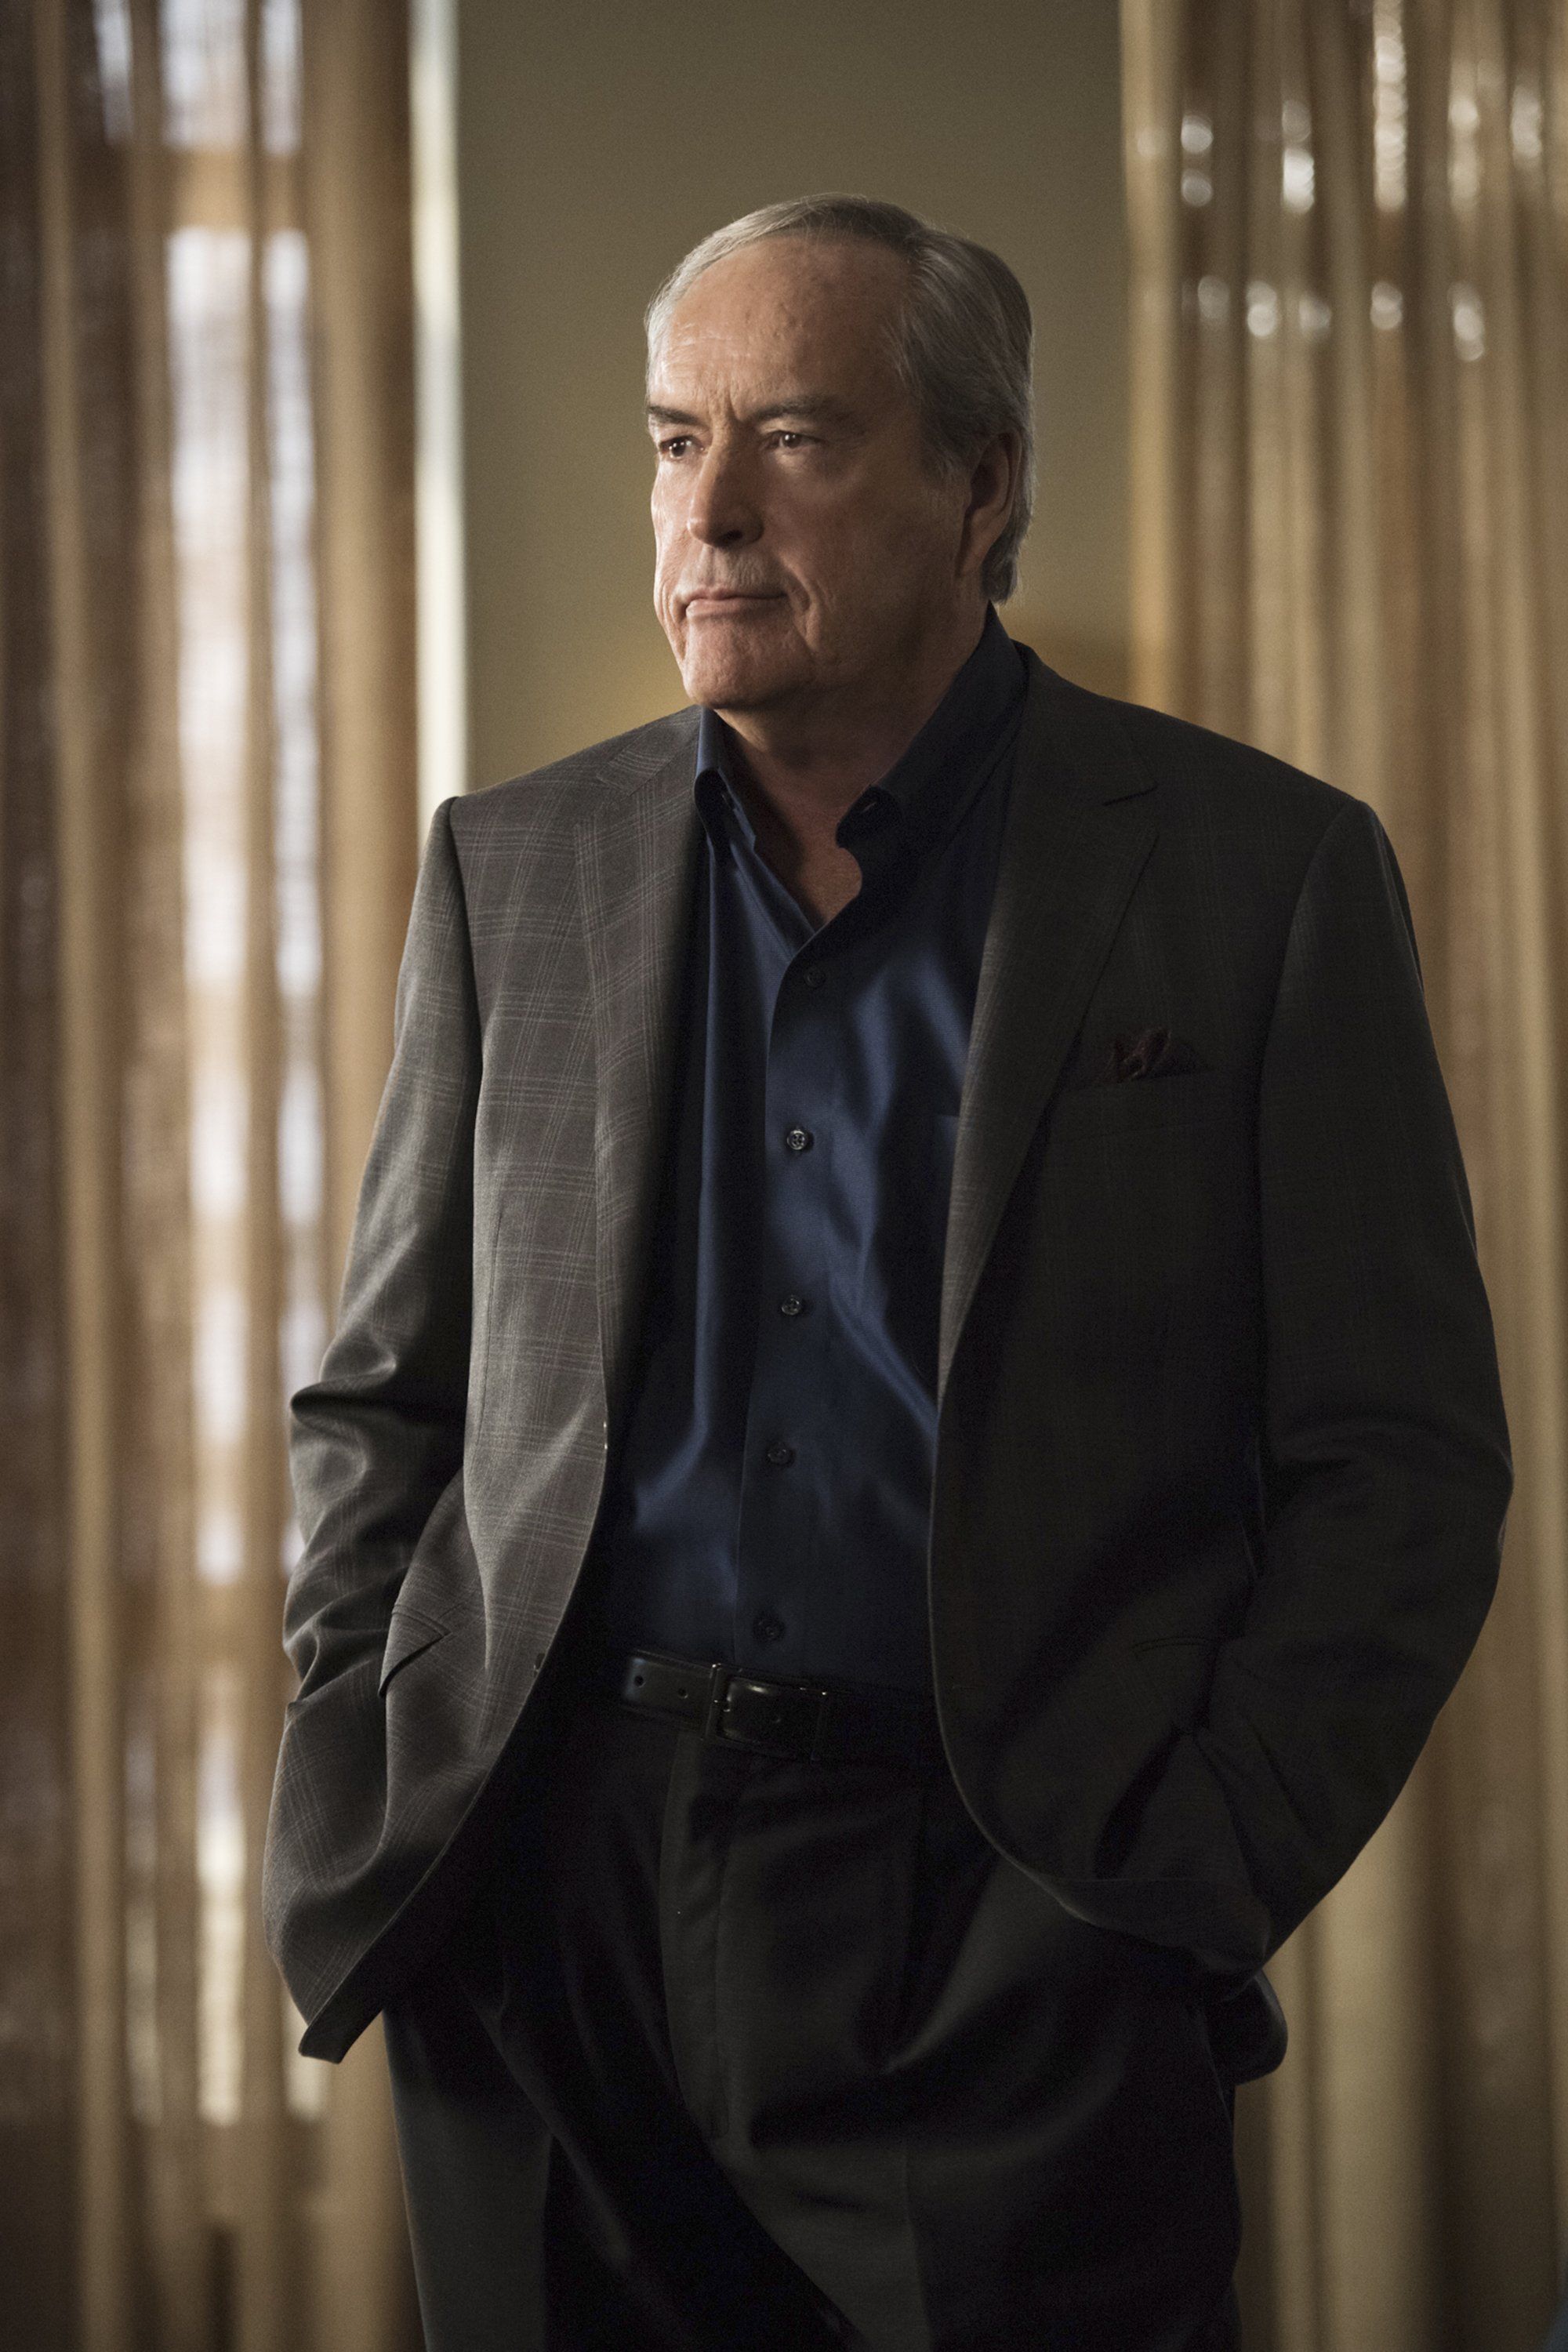 powers boothe net worth